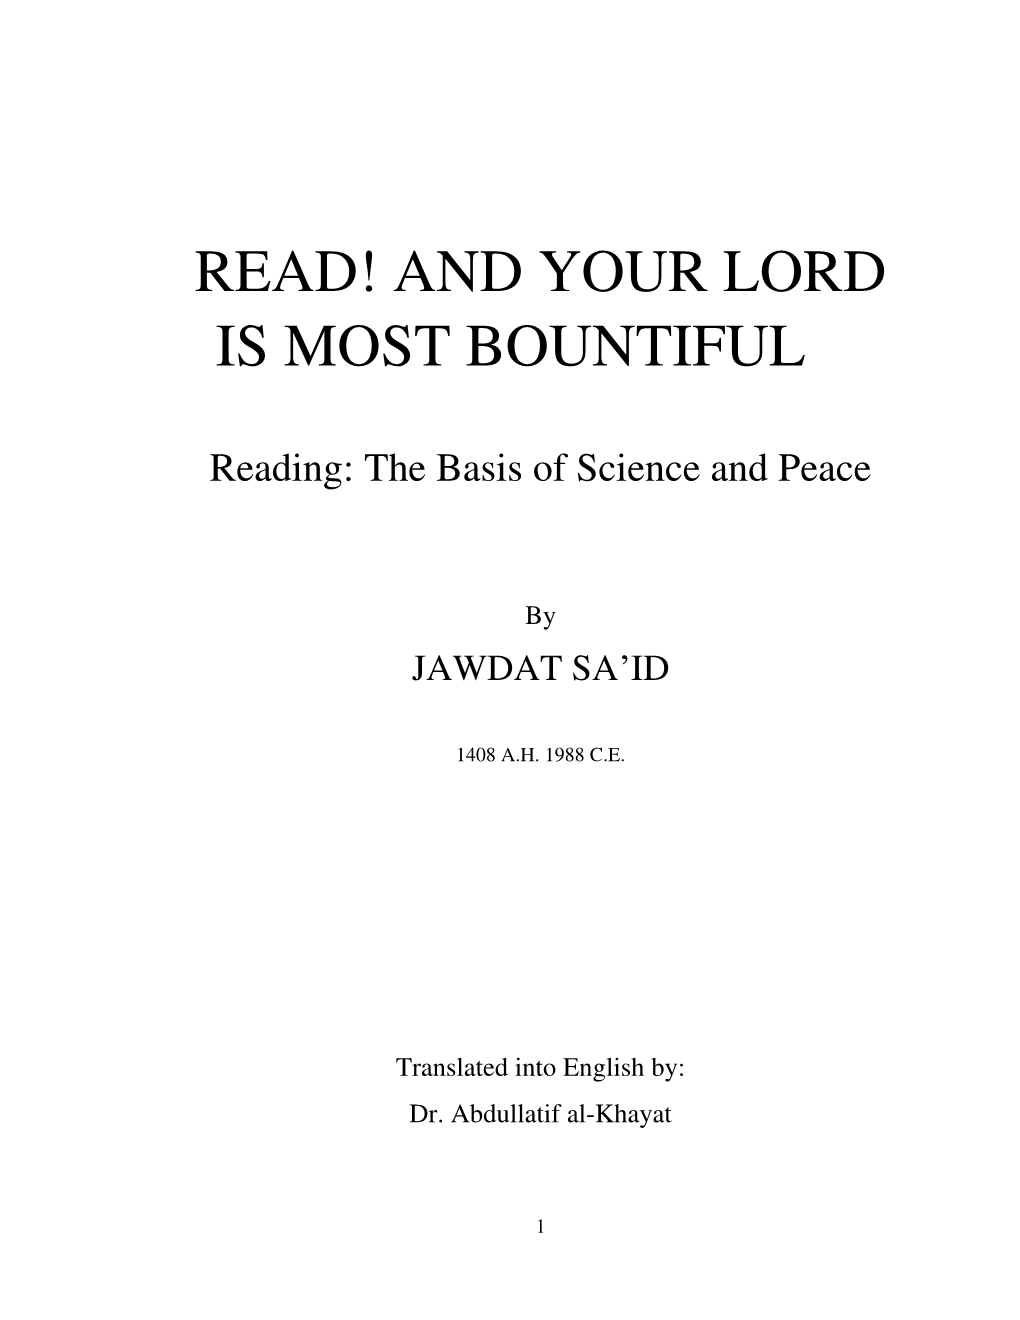 Read! and Your Lord Is Most Bountiful